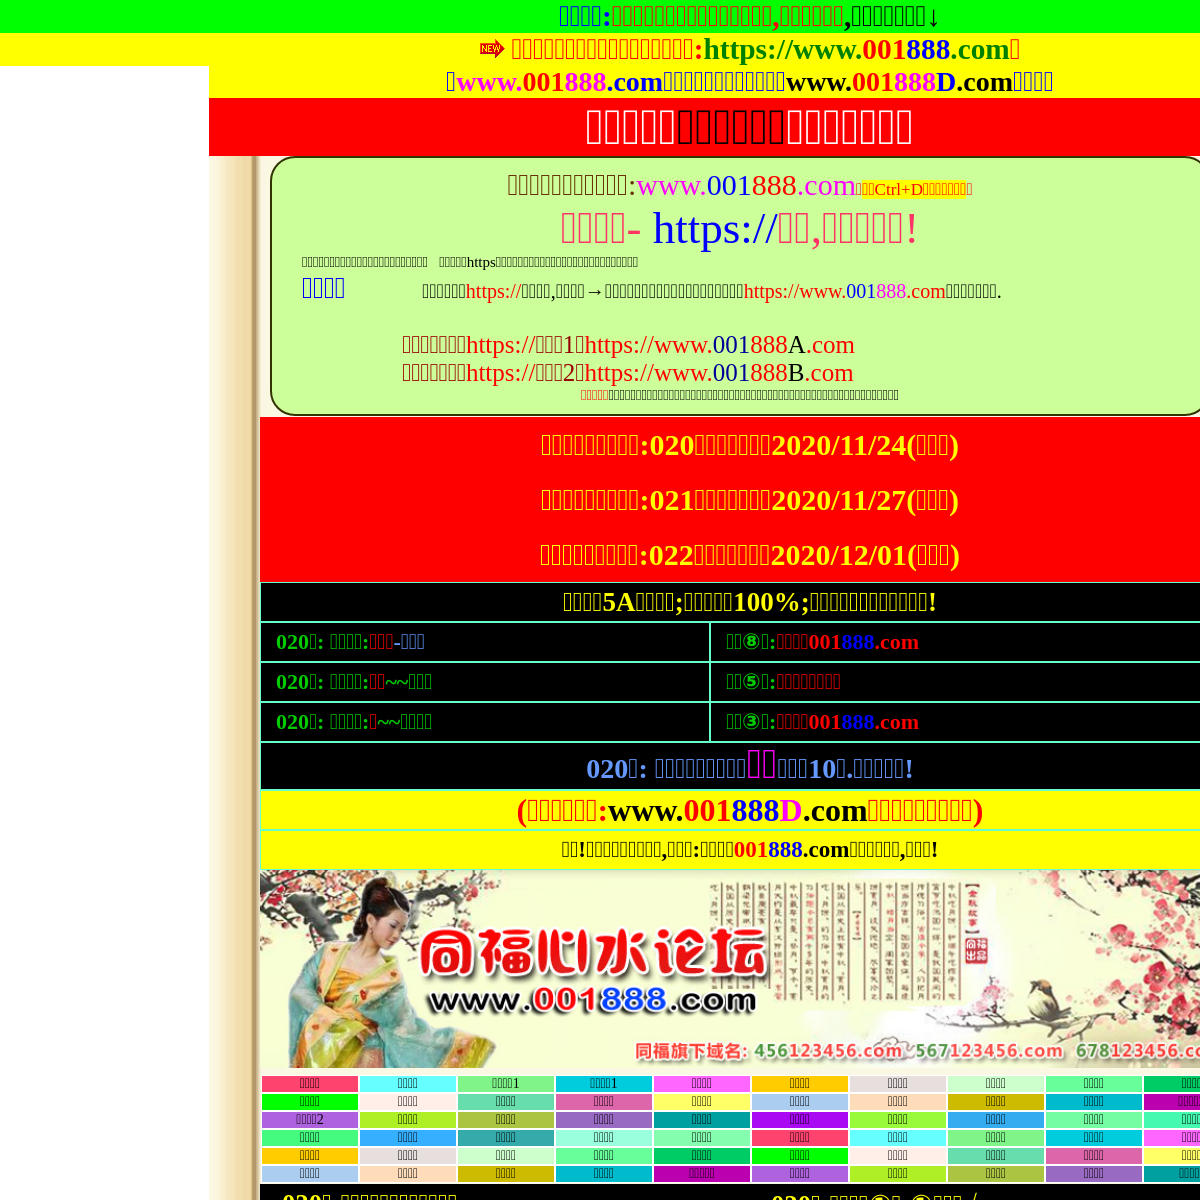 A complete backup of qipuse.com